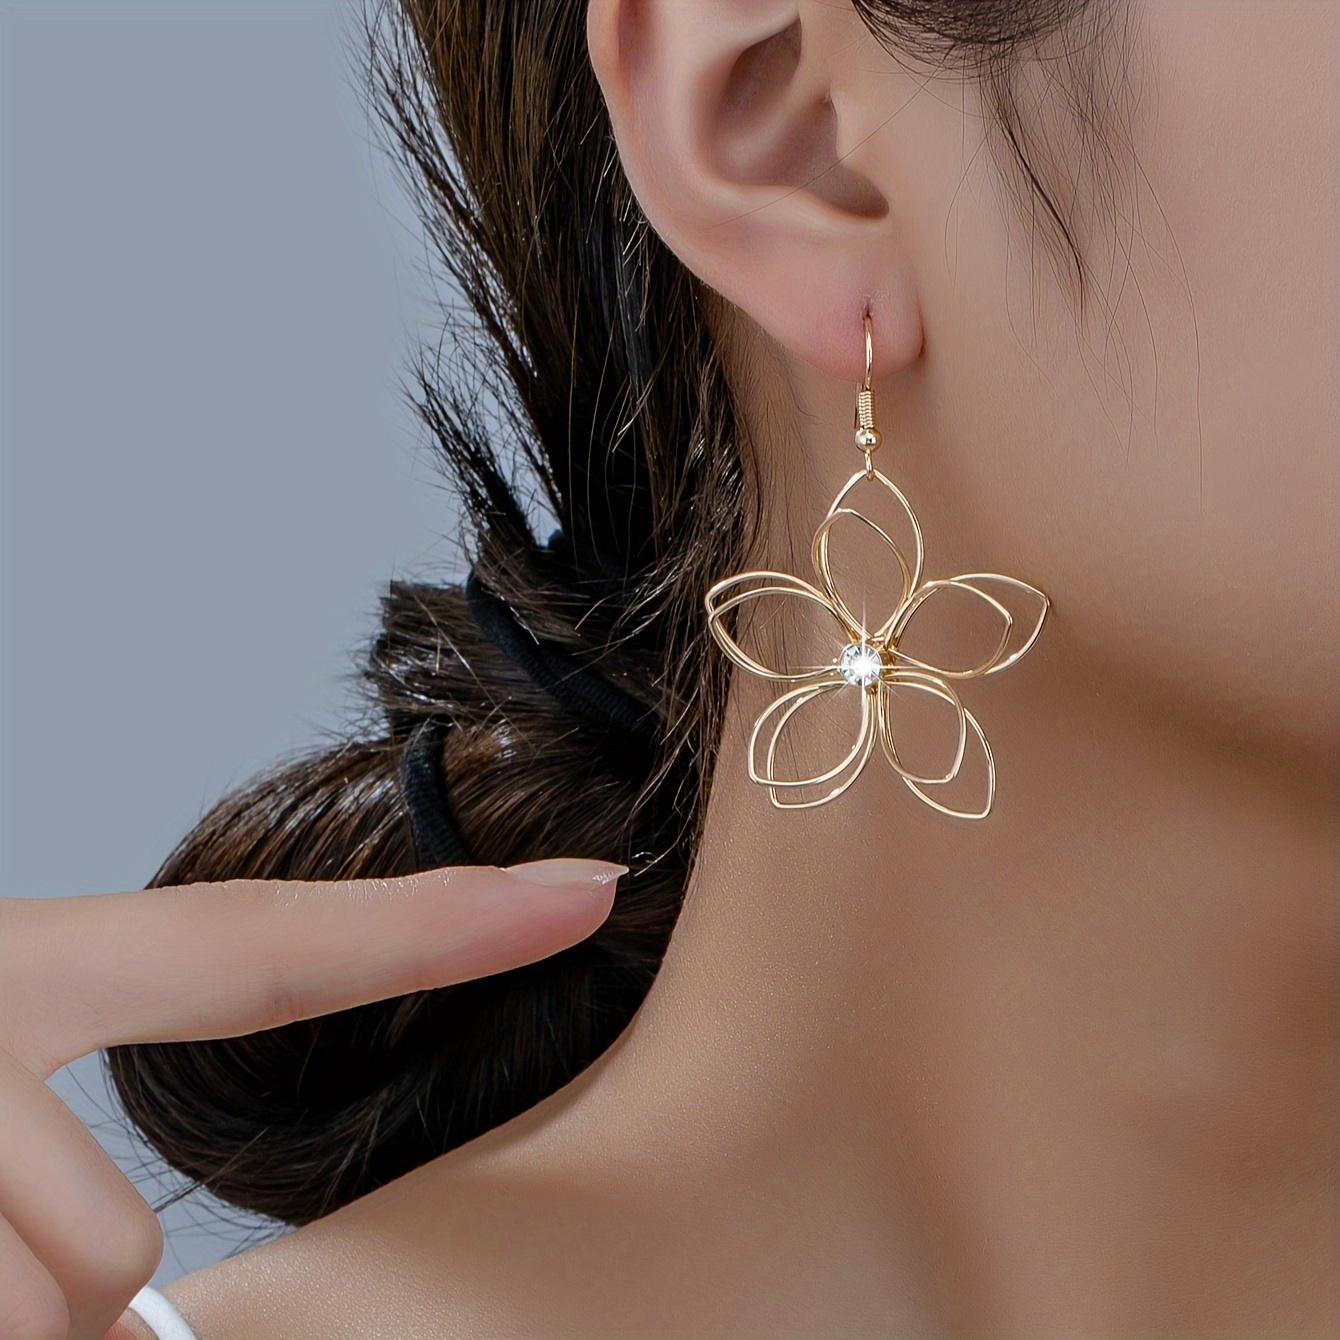 

Exquisite Hollow Flower Shiny Rhinestone Inlaid Dangle Earrings Elegant Simple Style Delicate Female Ear Ornaments